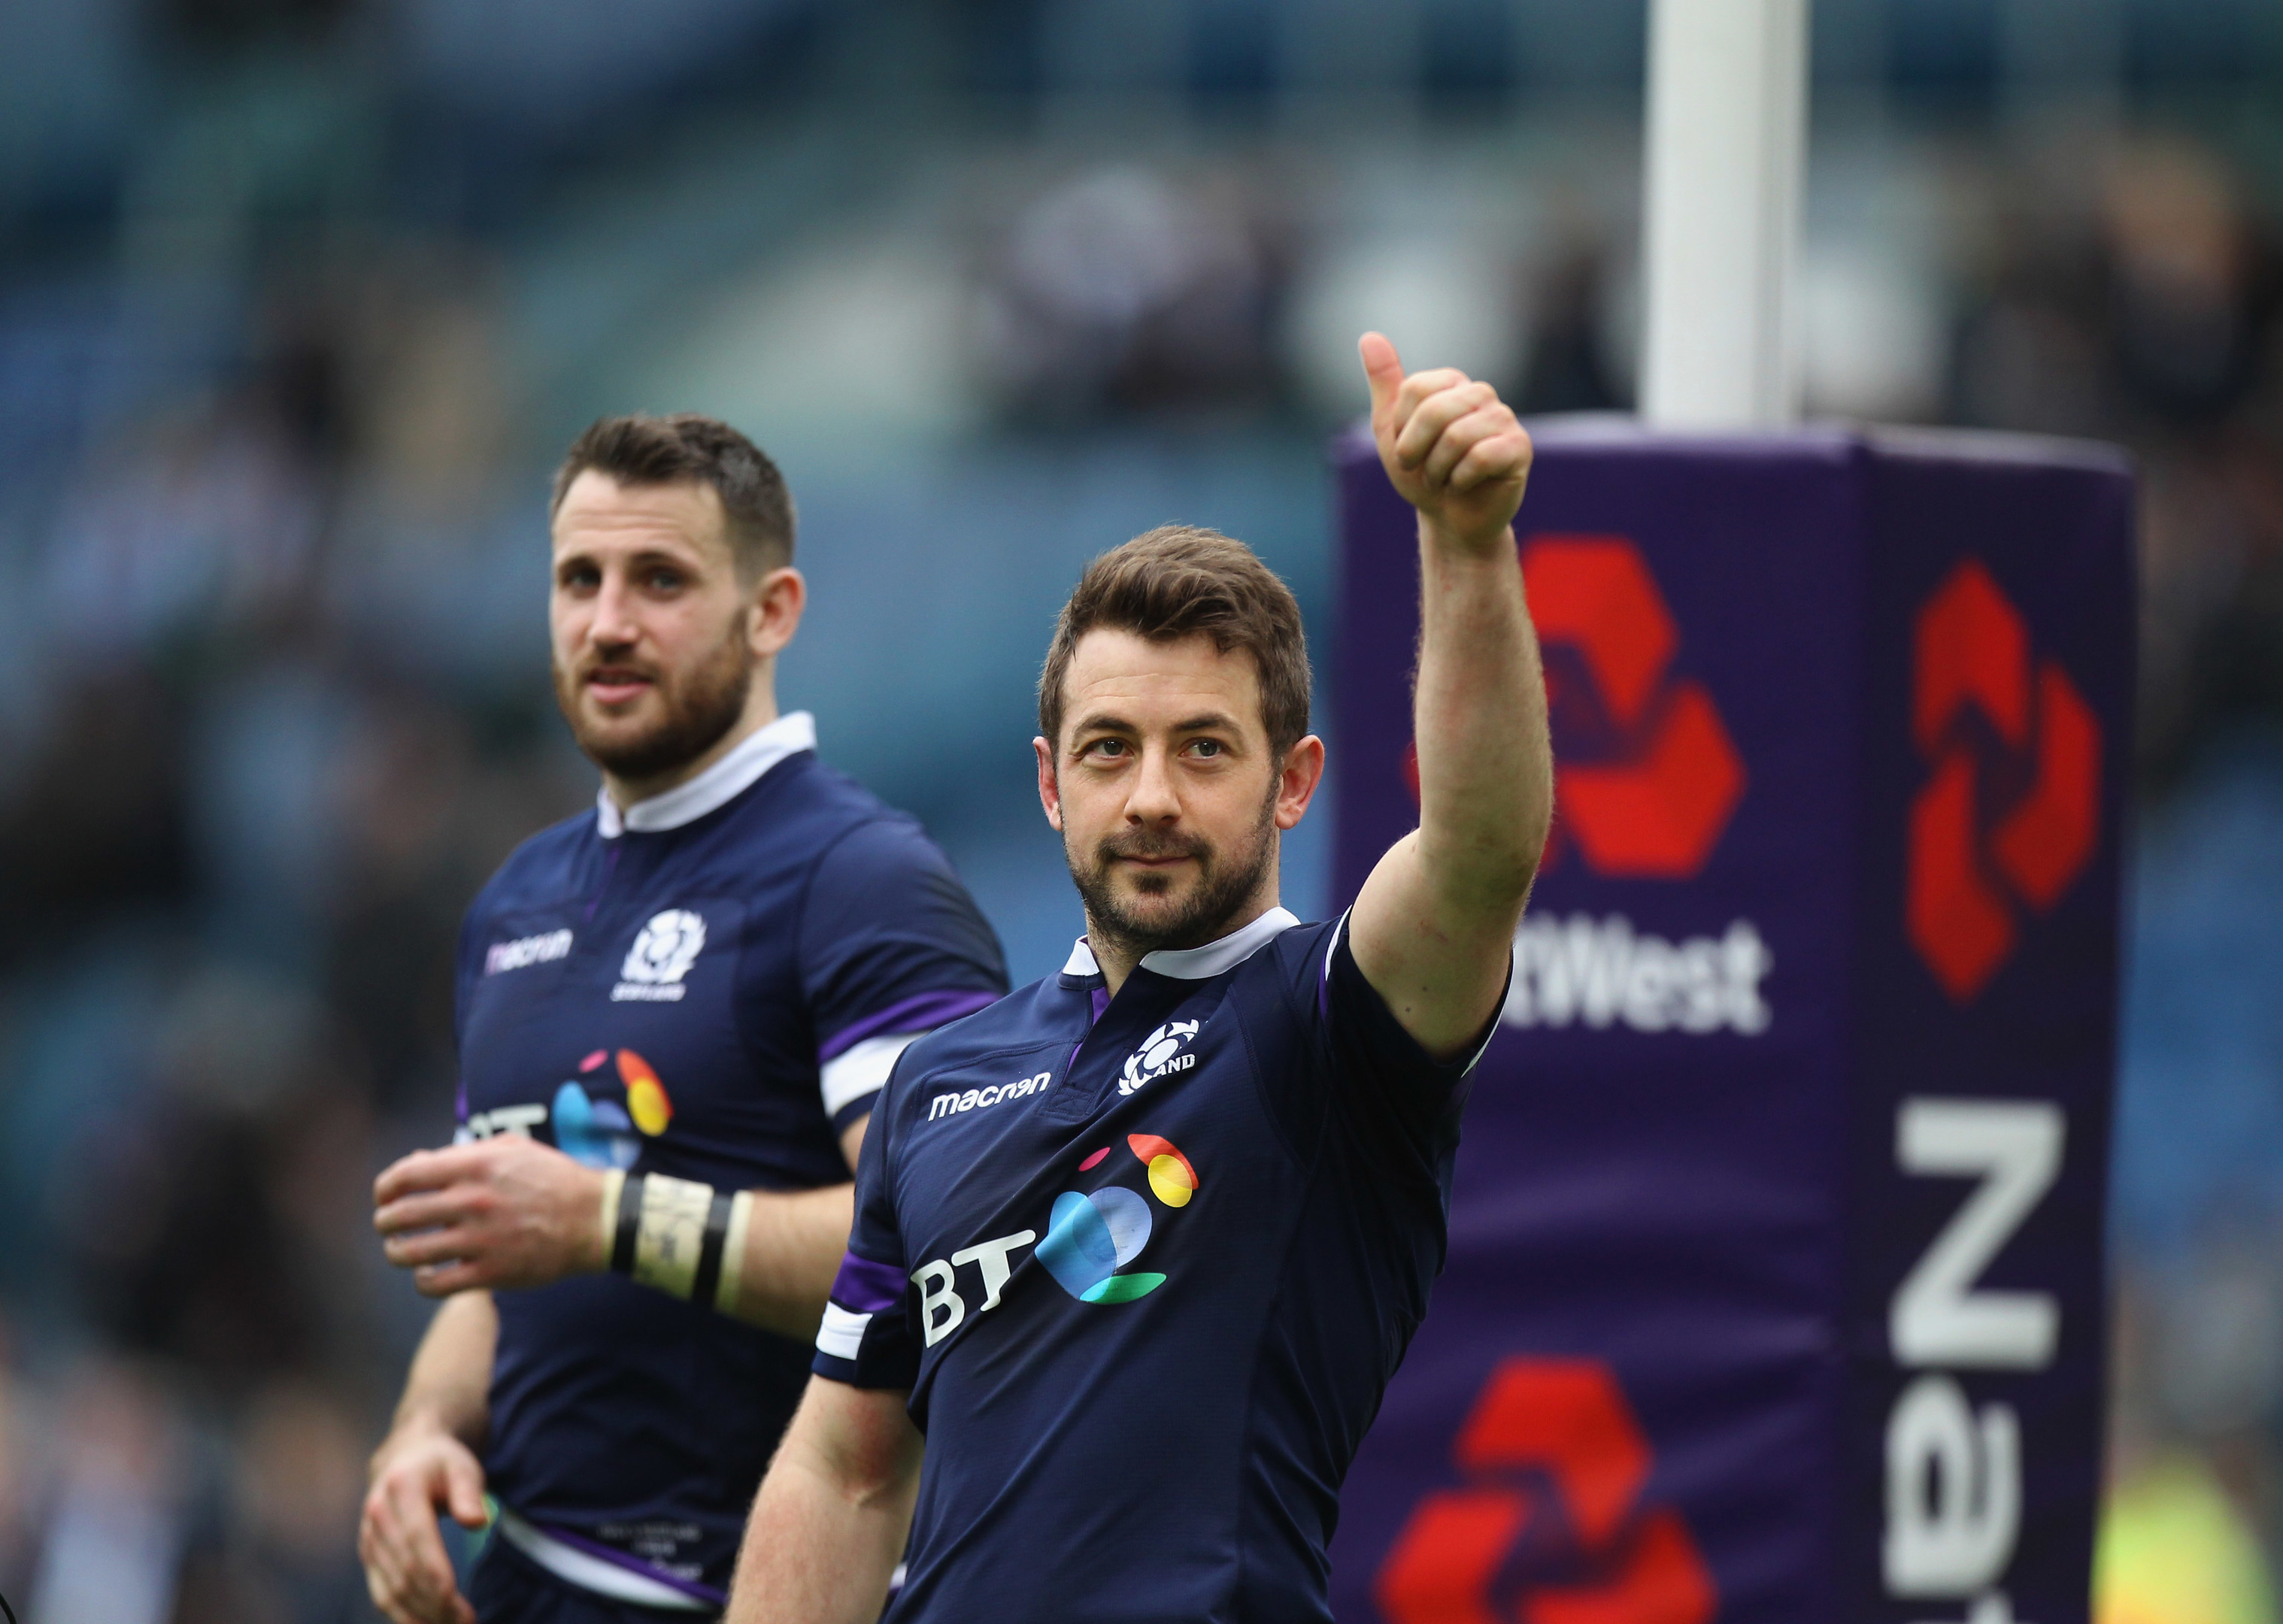 Greig Laidlaw celebrates victory after his late penalty won Scotland the game in Rome.